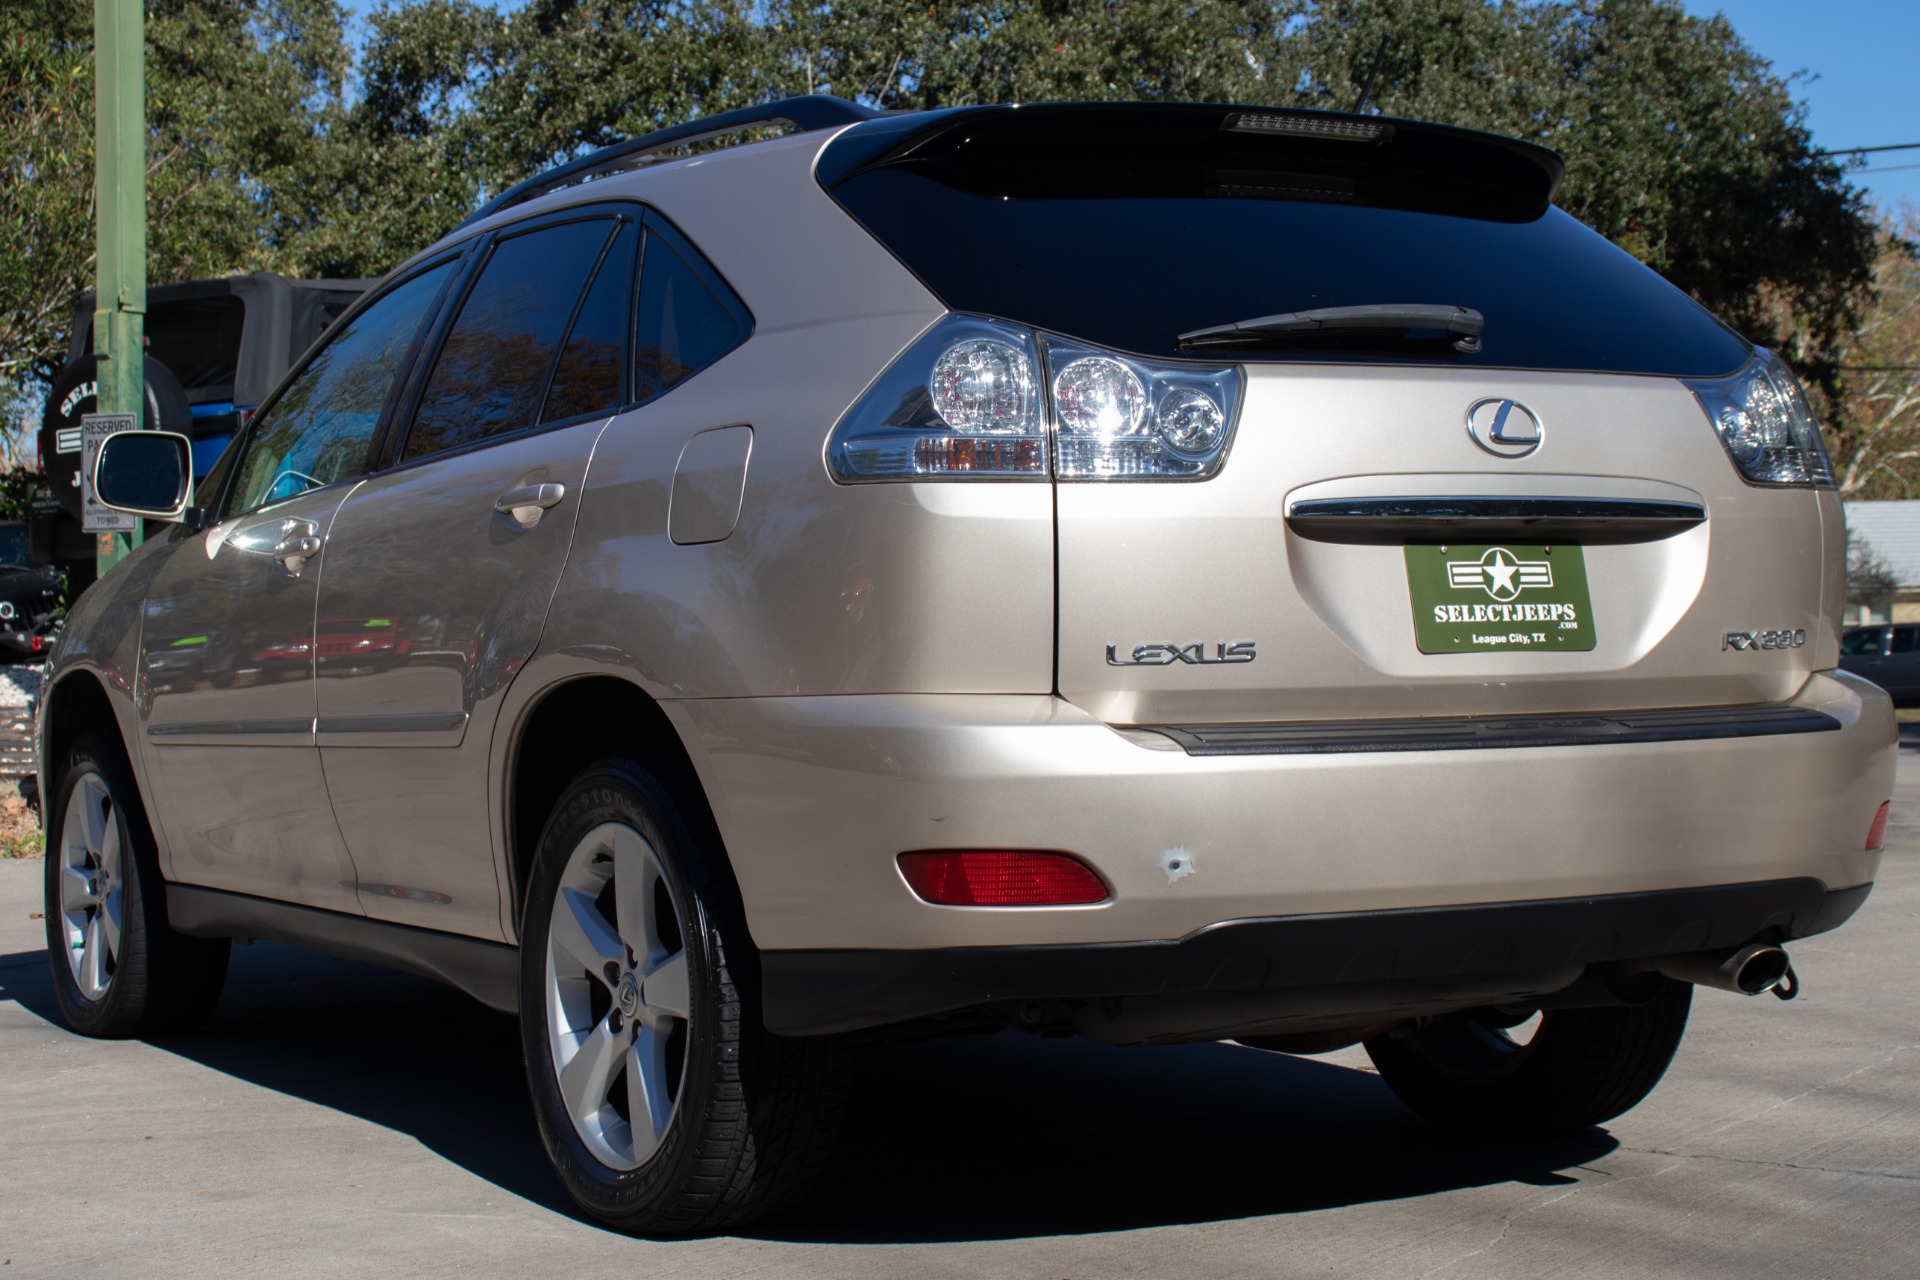 Used 2004 Lexus RX 330 For Sale (7,995) Select Jeeps